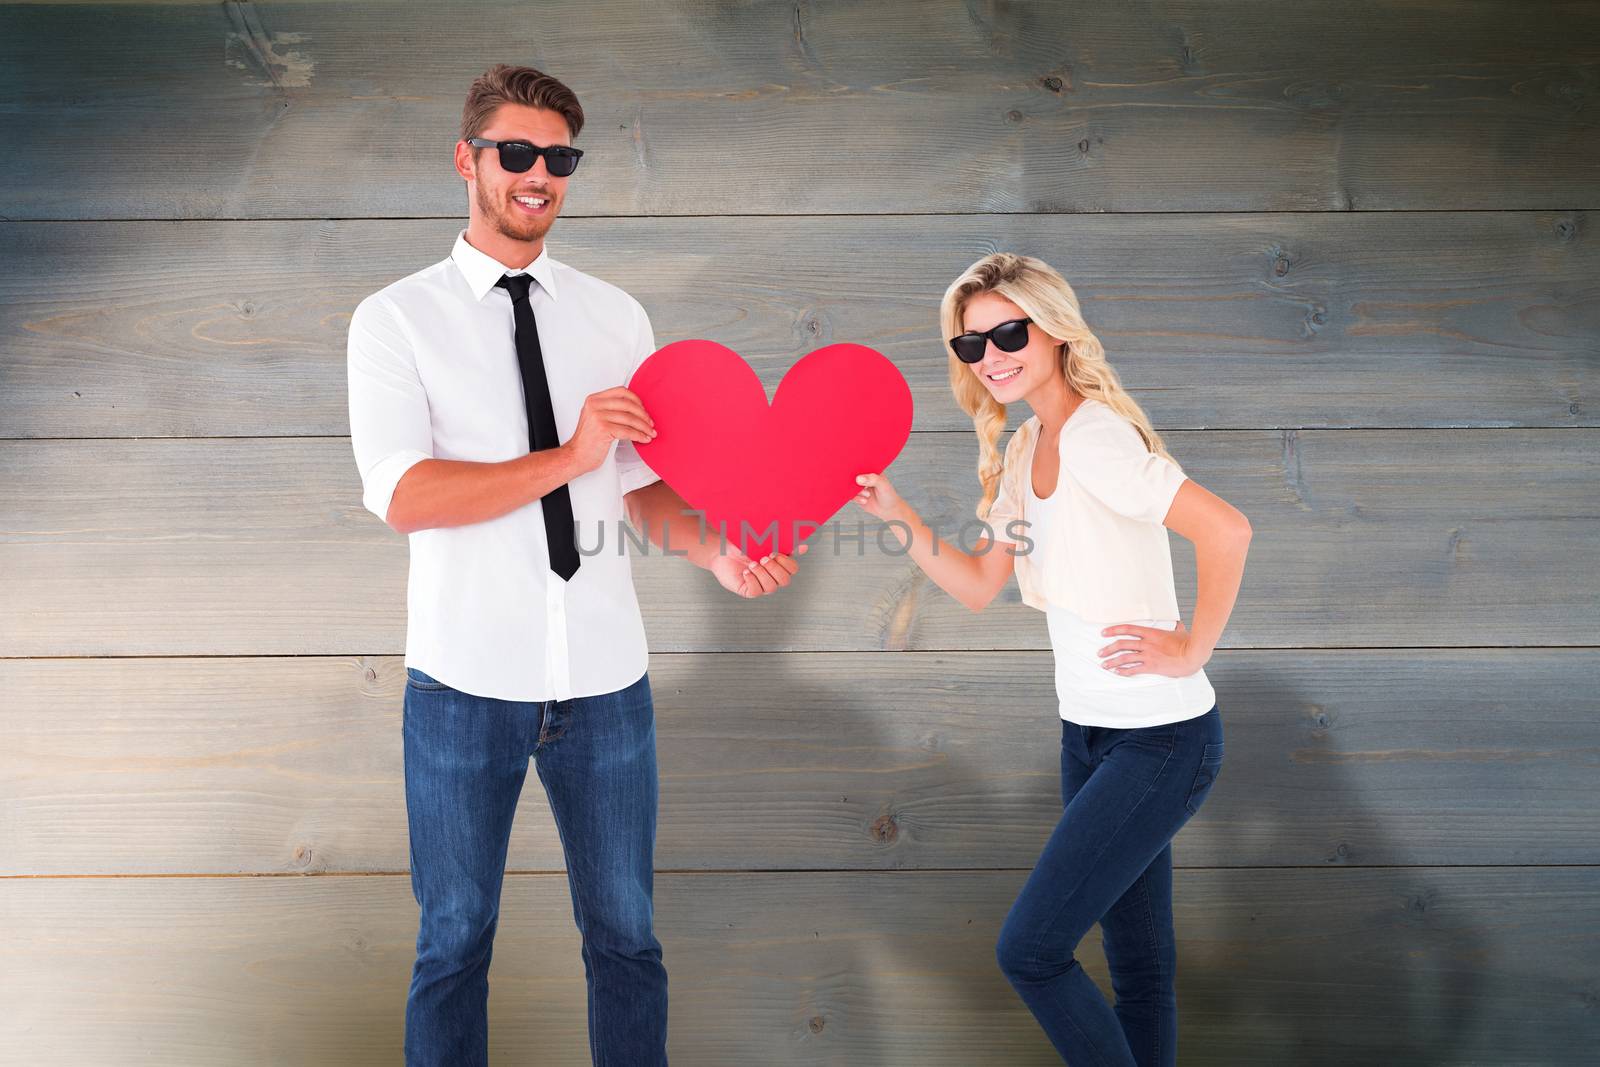 Cool young couple holding red heart against bleached wooden planks background